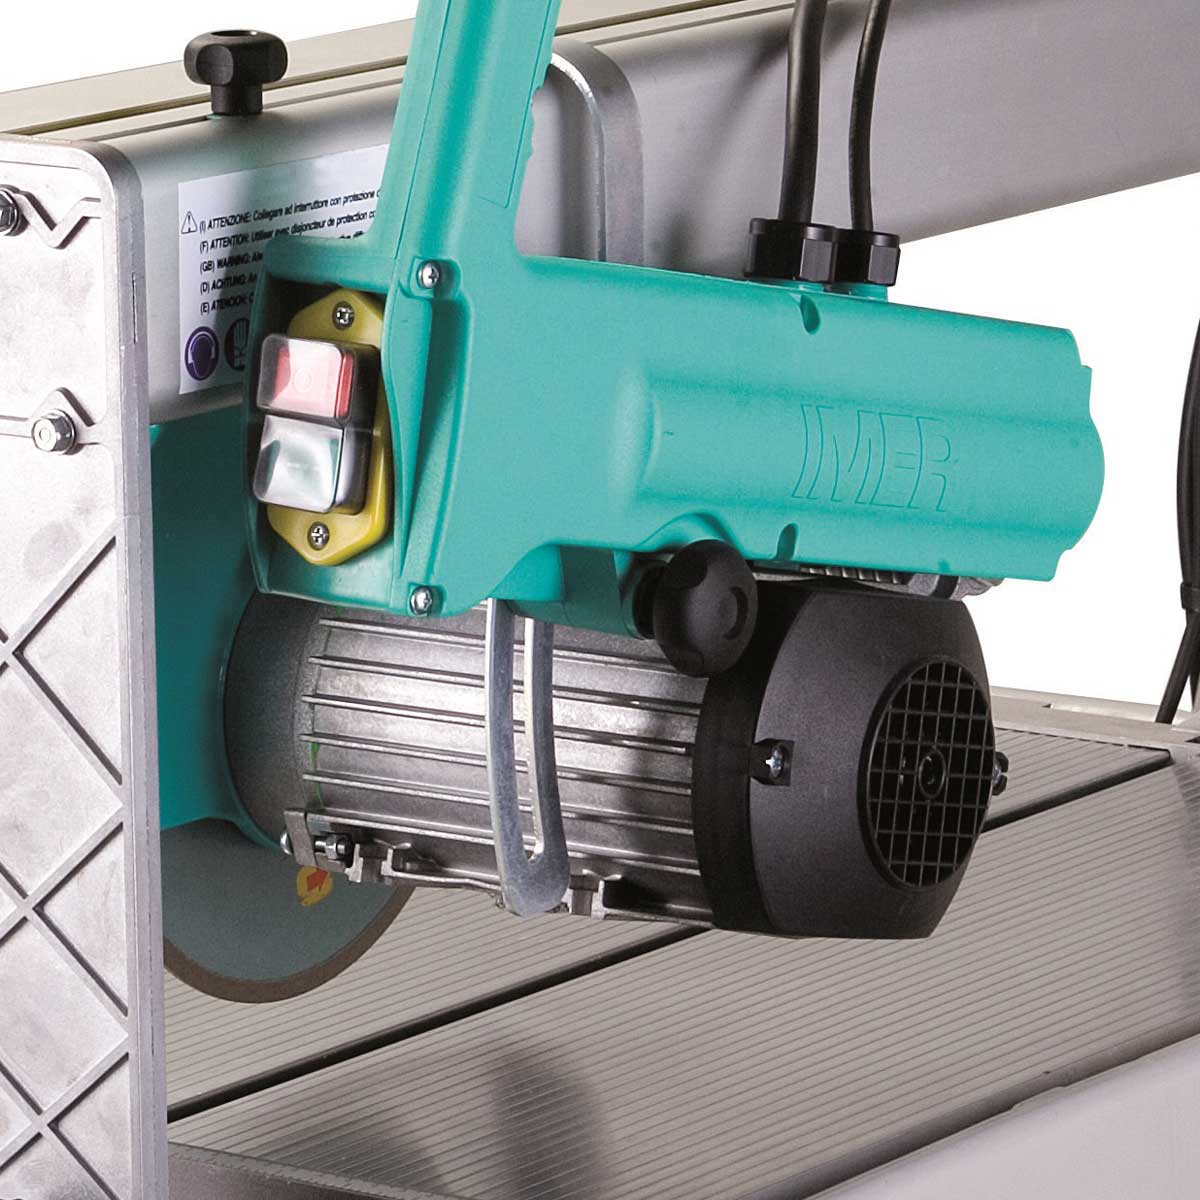 IMER Combicut 250VA Tile & Stone Saw - FREE DEPOT SHIPPING (Conditions Apply) (7444877765)